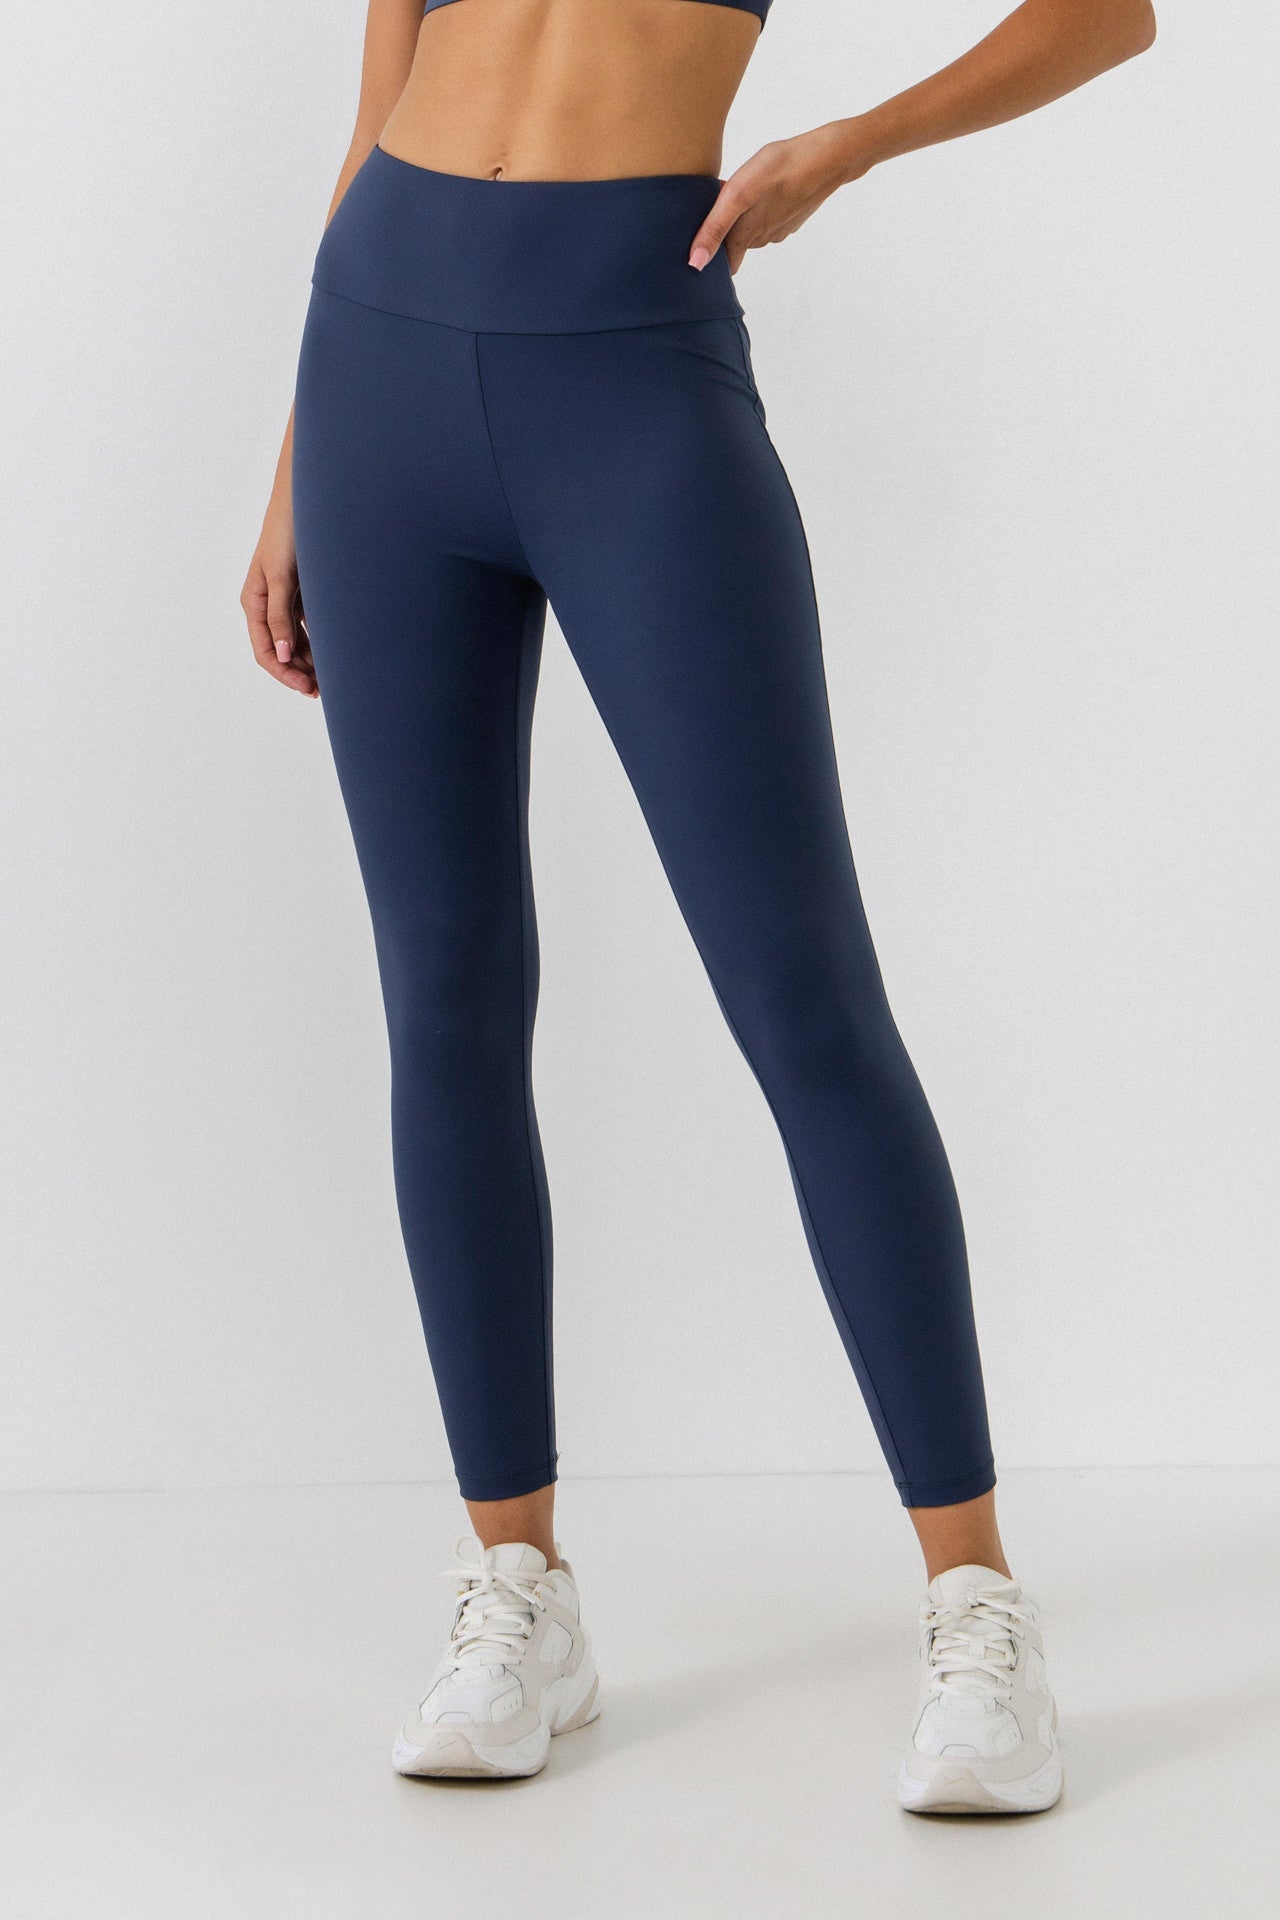 GREY LAB-Leggings-PANTS available at Objectrare